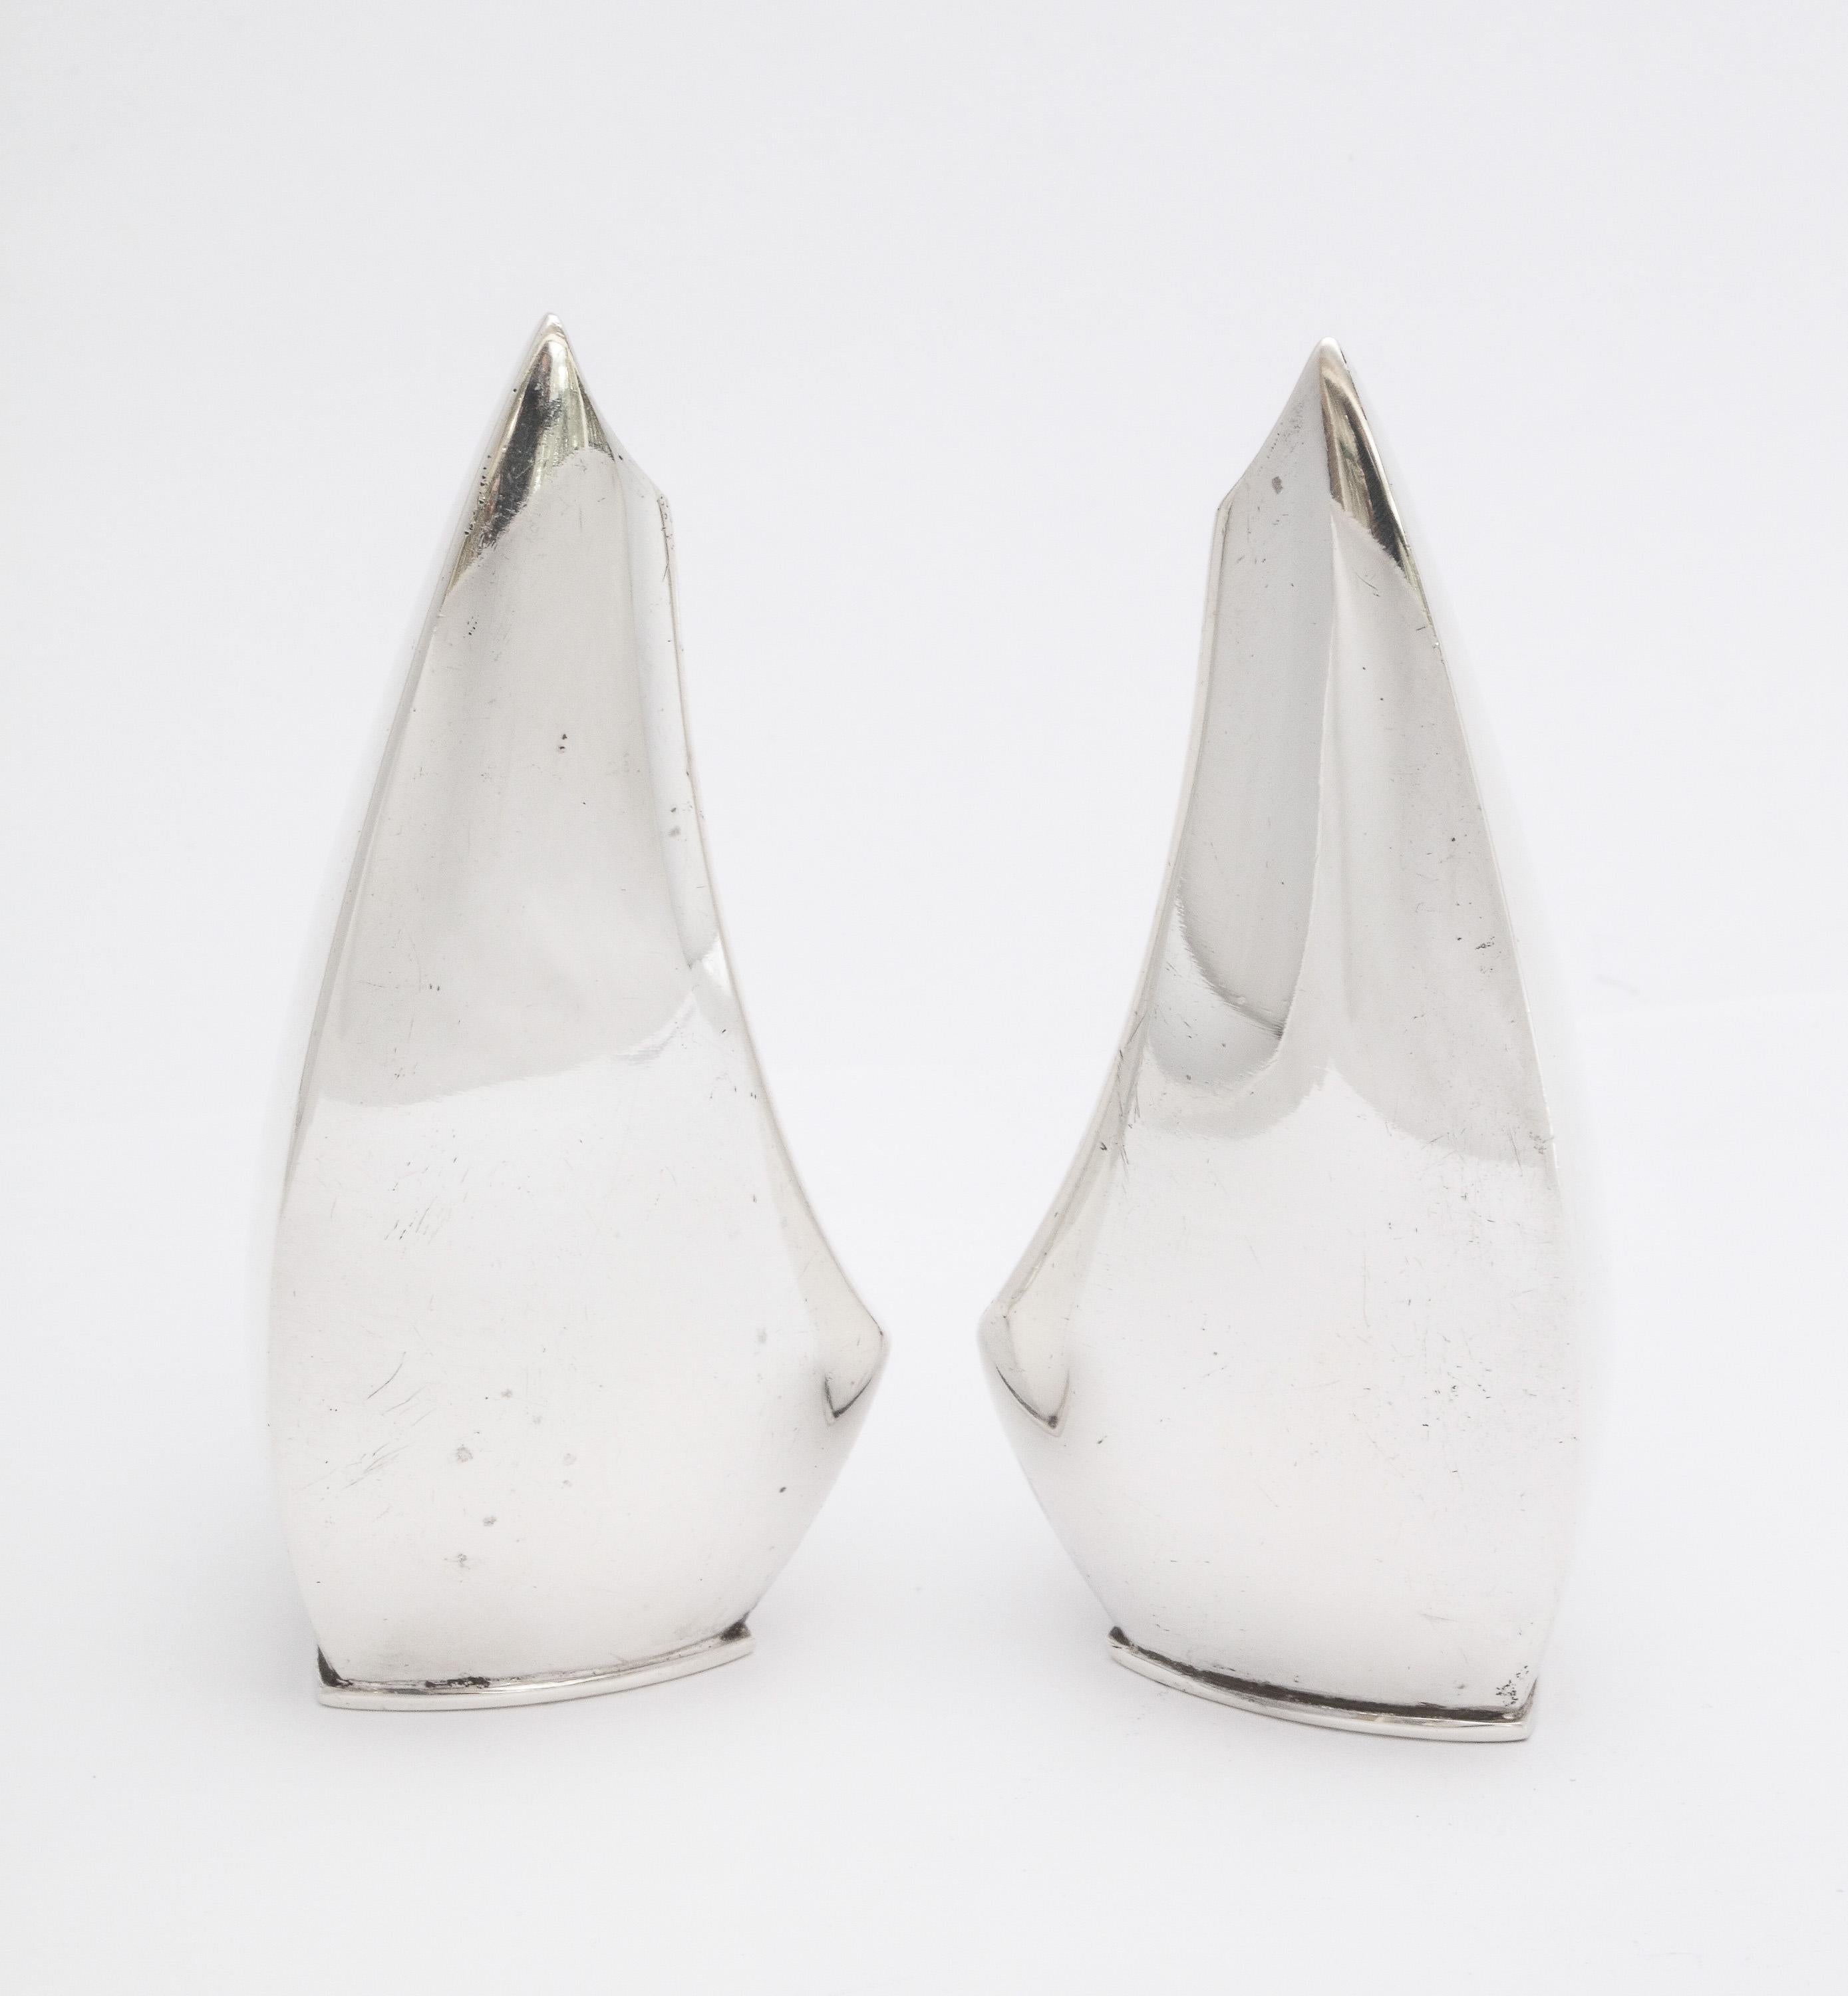 Mid-Century Modern pair of sterling silver salt and pepper shakers, Denmark, circa 1950s, ABSA - maker. Each shaker is 3 inches high x 1 1/2 inches wide (at widest point) x 1 1/2 inches deep (at deepest point). Graceful design. Dark spots in photos